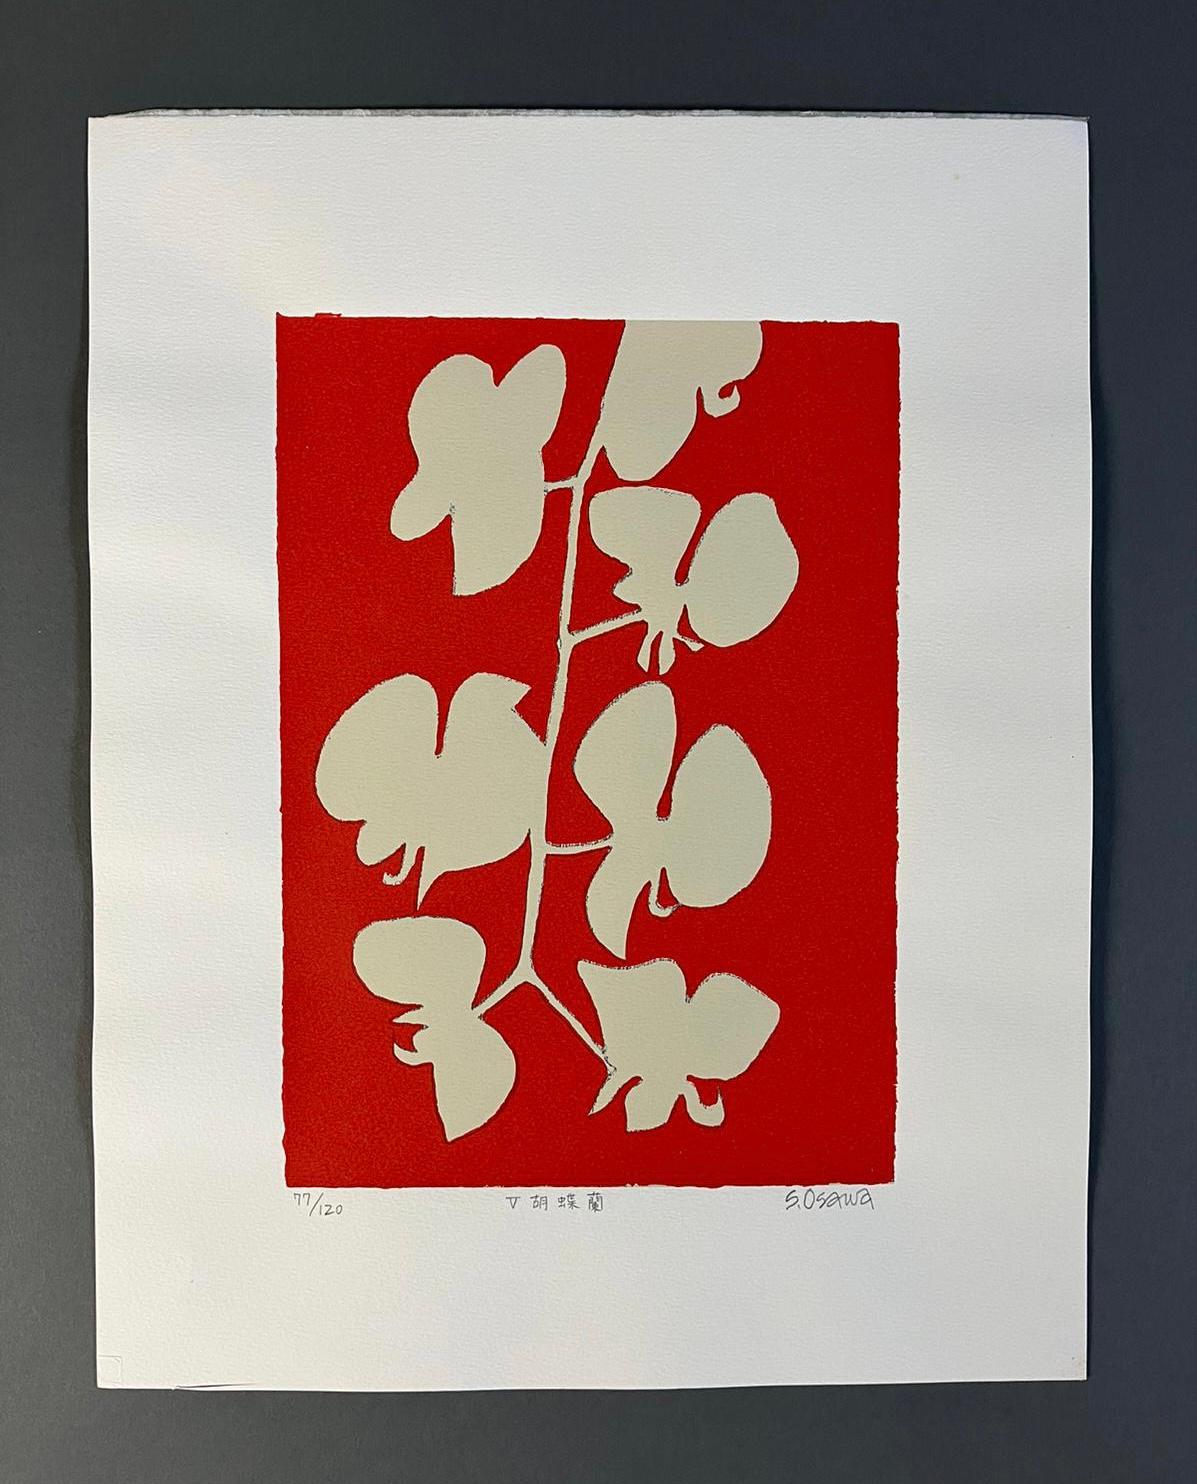 Rare limited edition screen print titled 